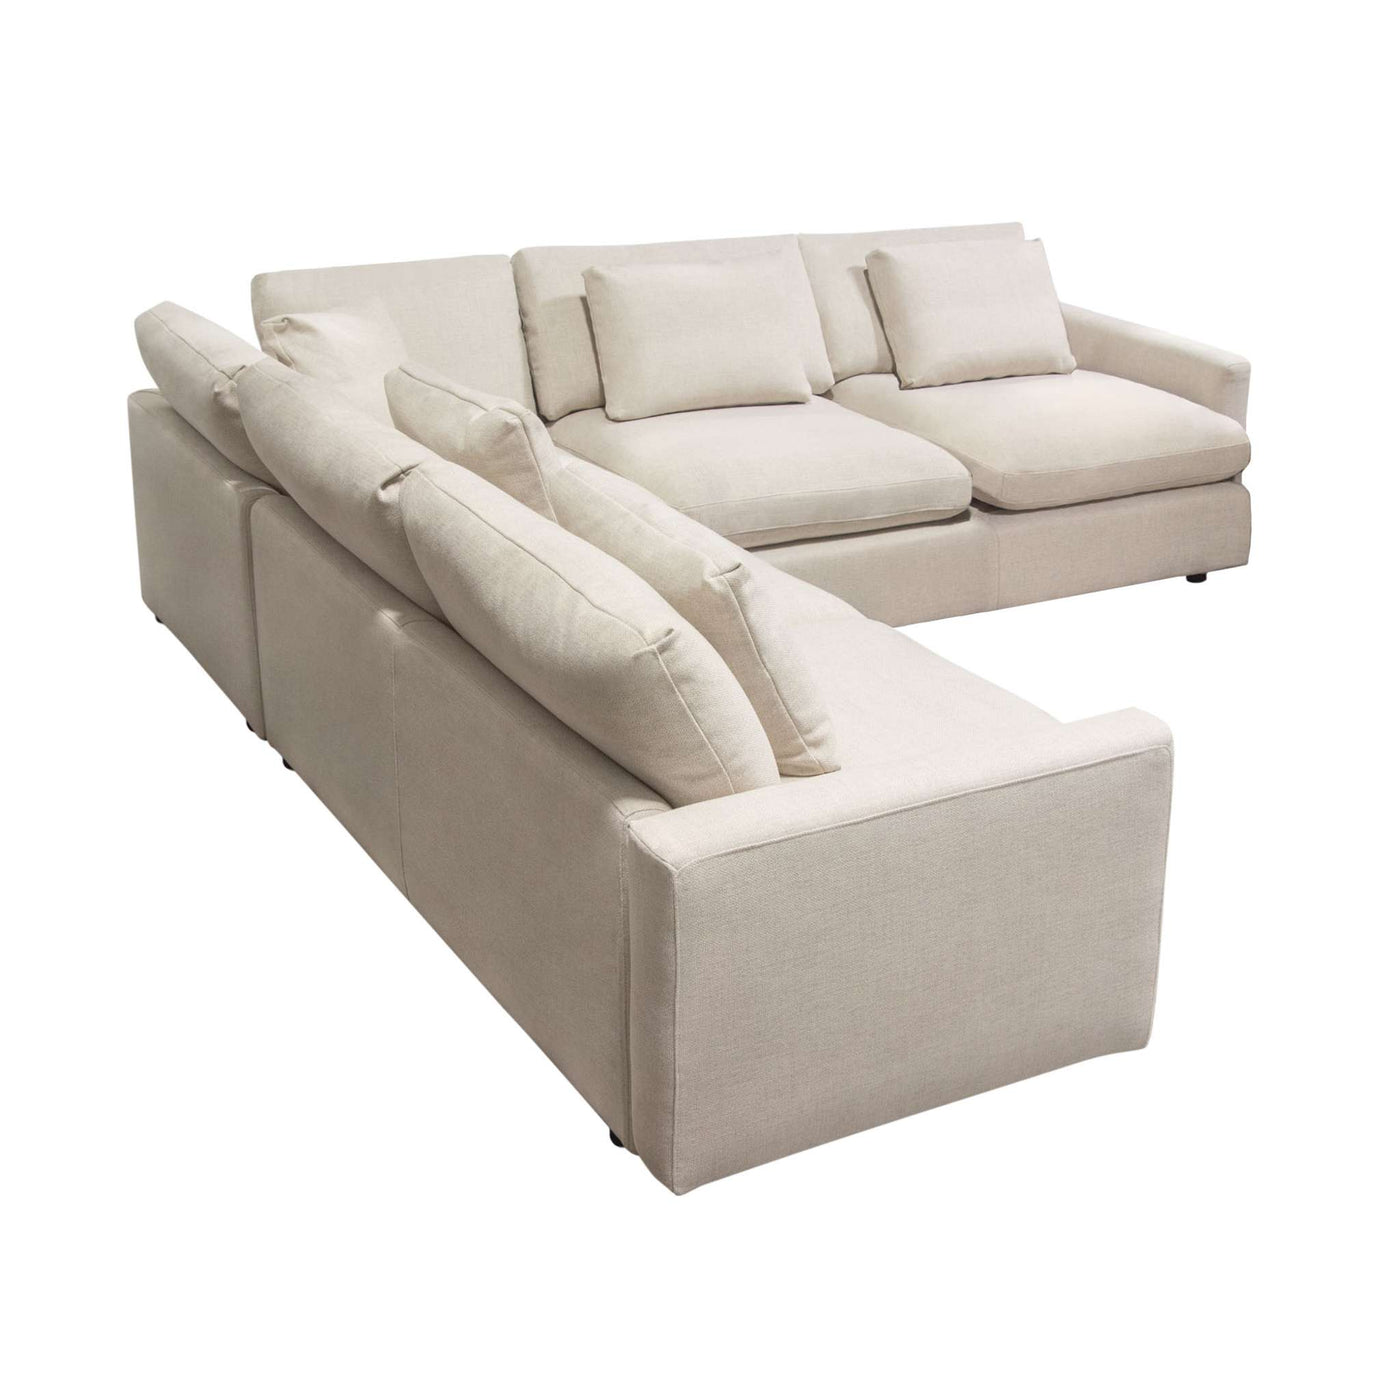 Arcadia Sectional w/ Feather Down Seating in Fabric by Diamond Sofa